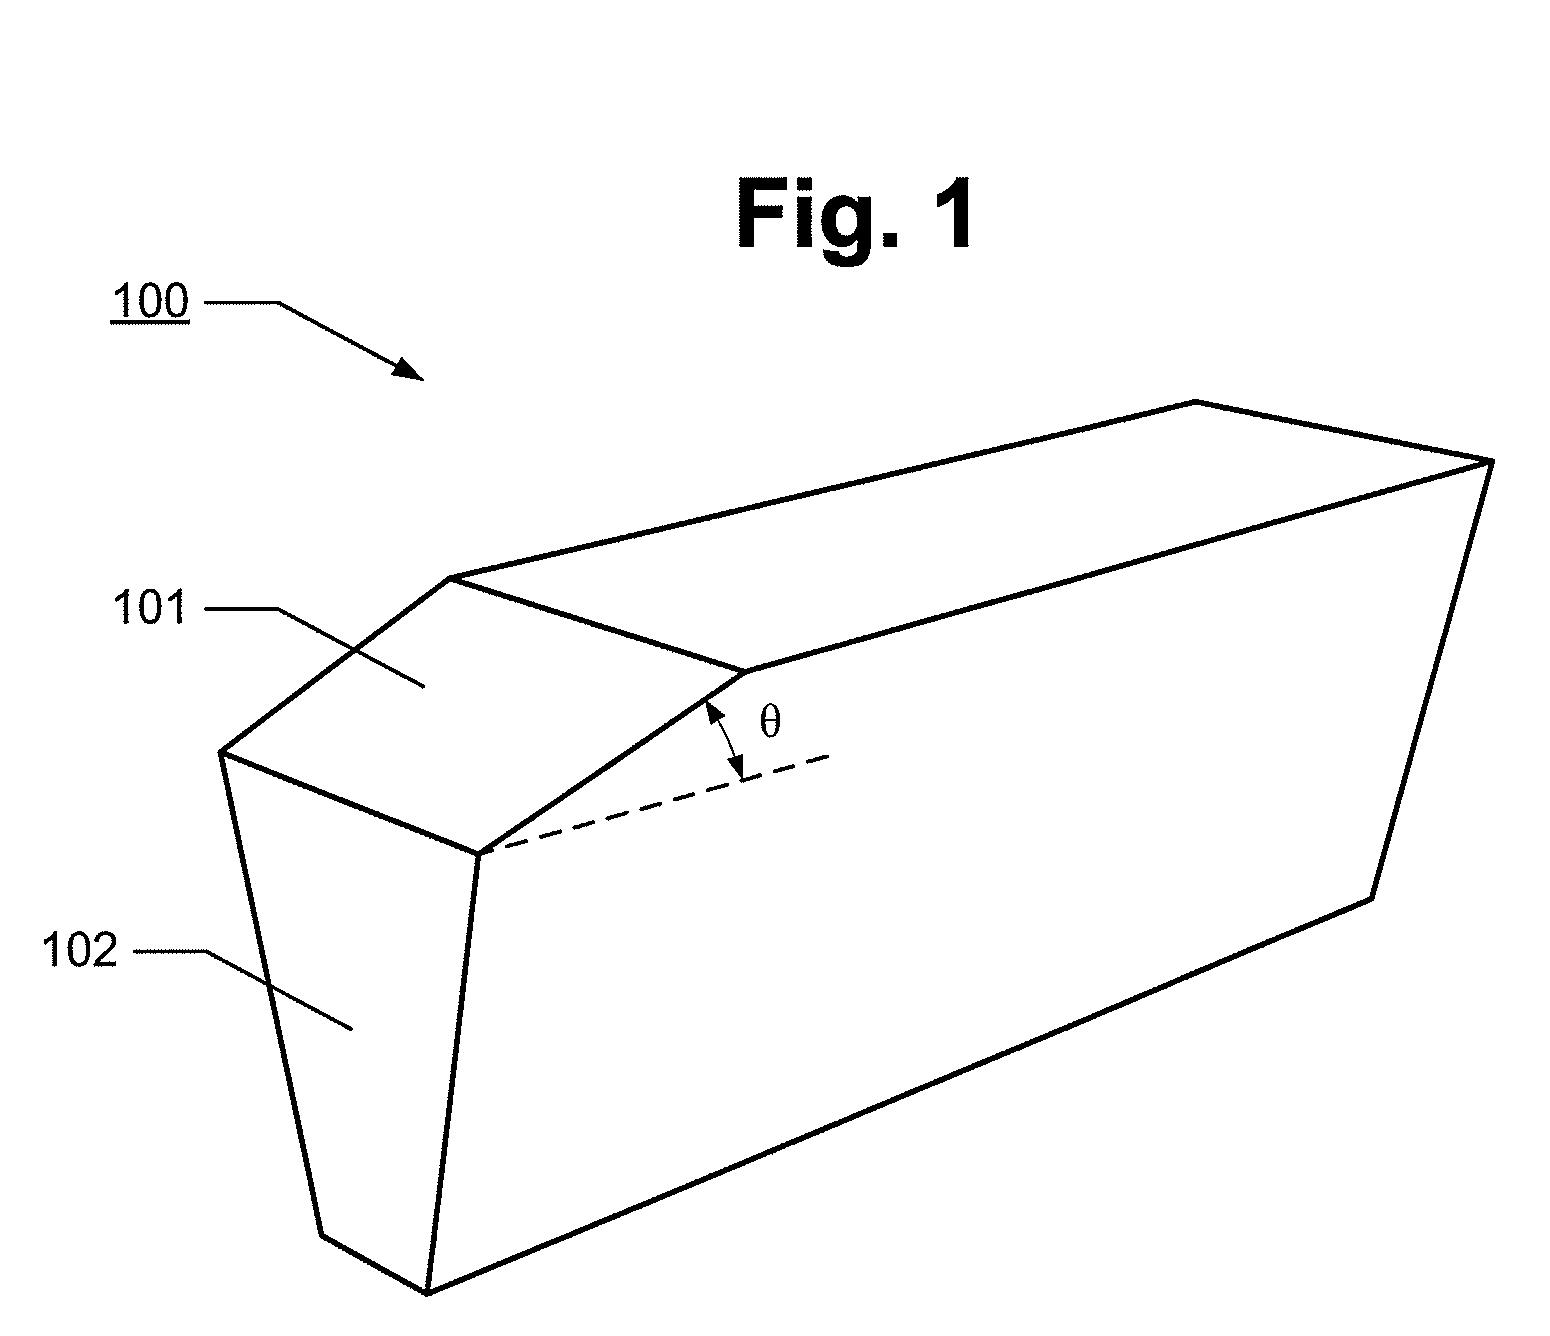 Method of measuring a bevel angle in a write head